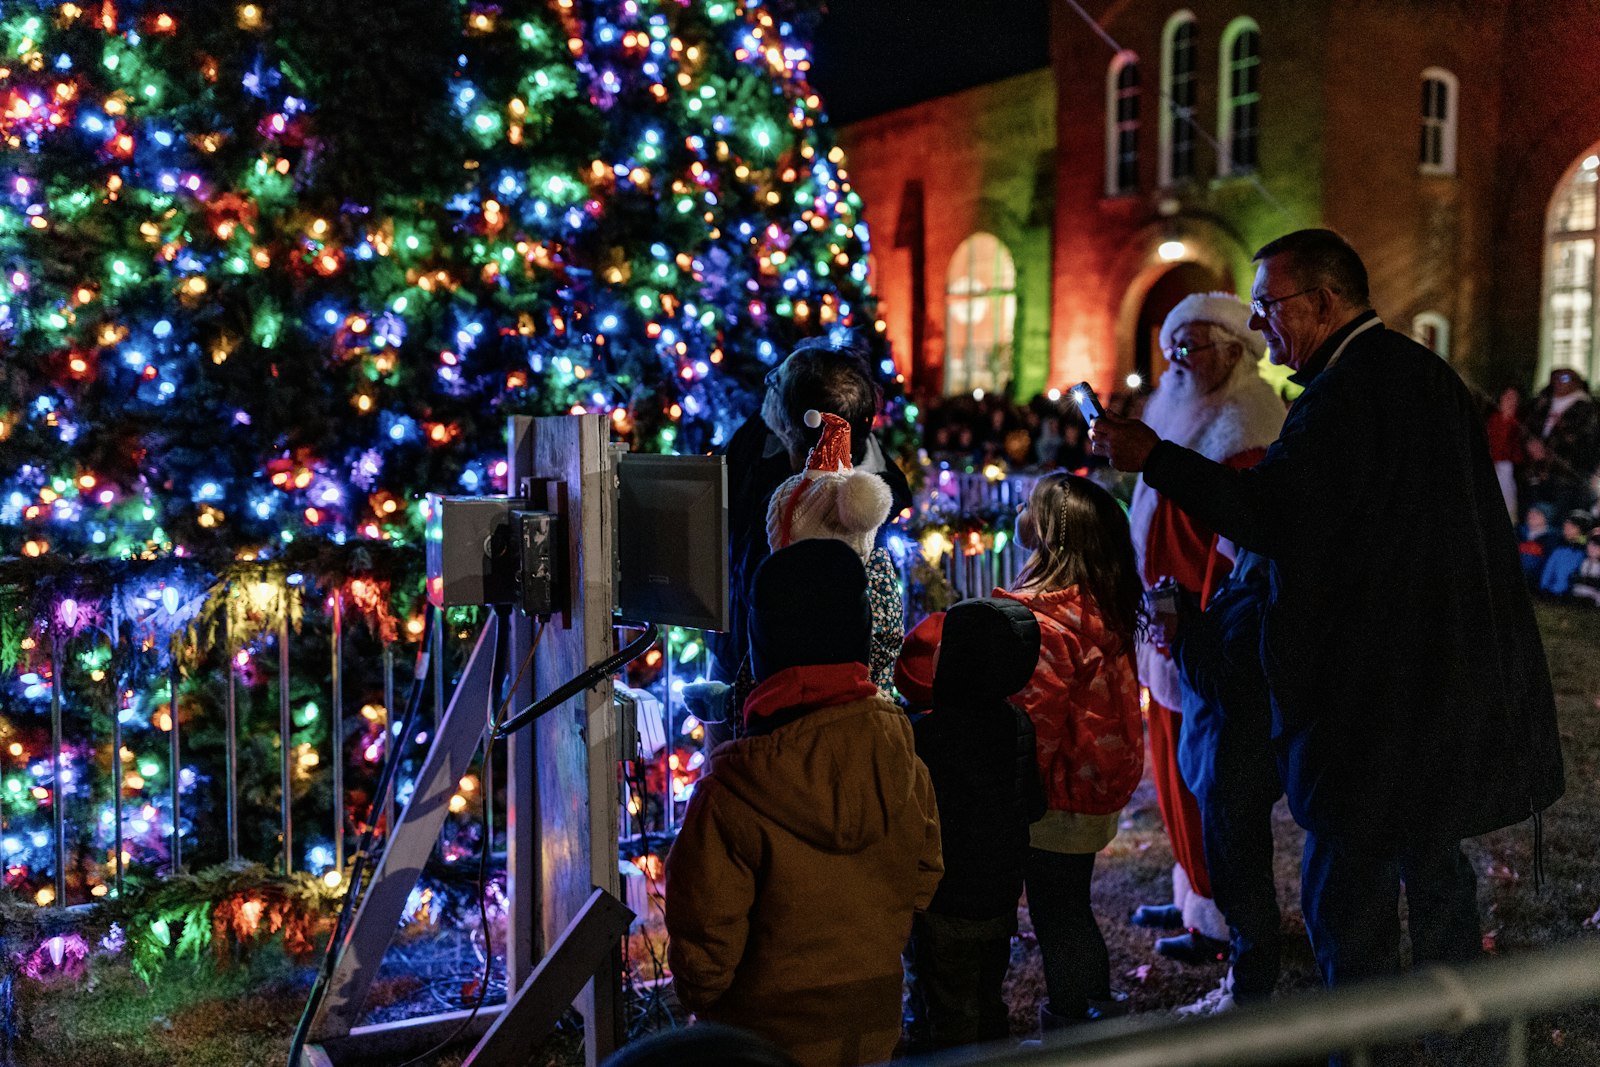 A family with small children gazes in wonder at the nearly 30-foot Christmas tree after flipping the switch to turn it on during the Orchard Lake Schools' "Mingle All the Way" celebration Nov. 19. (Alissa Tuttle | Special to Detroit Catholic)